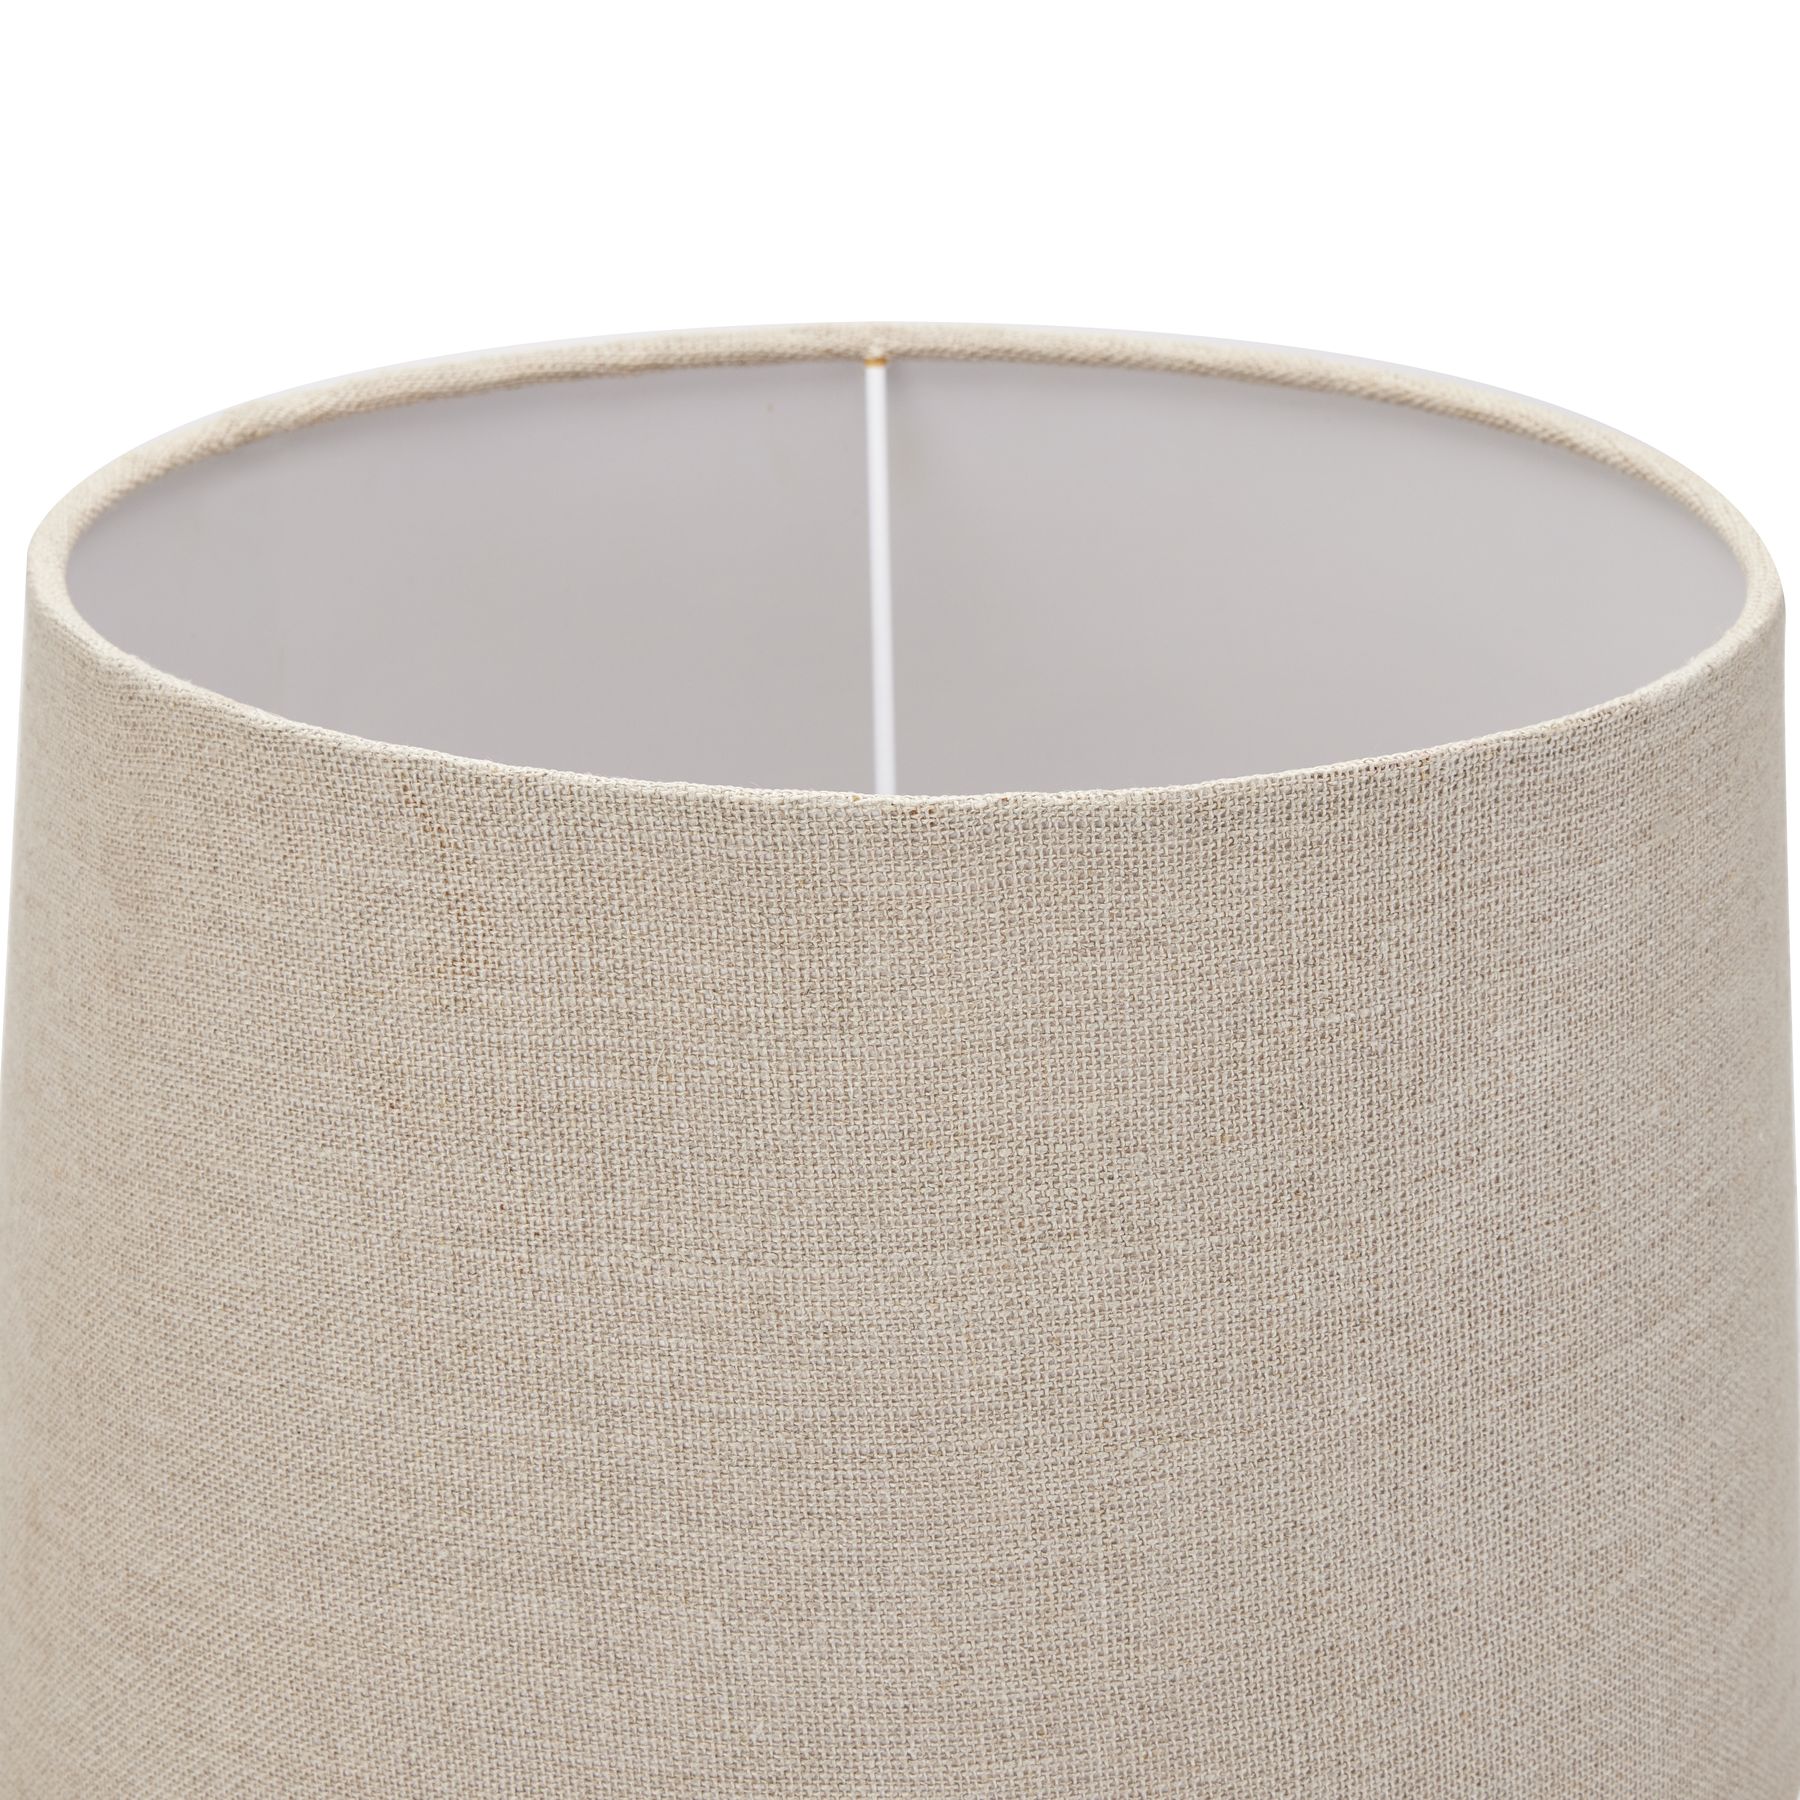 Delaney Natural Wash Candlestick Lamp With Linen Shade - Image 3